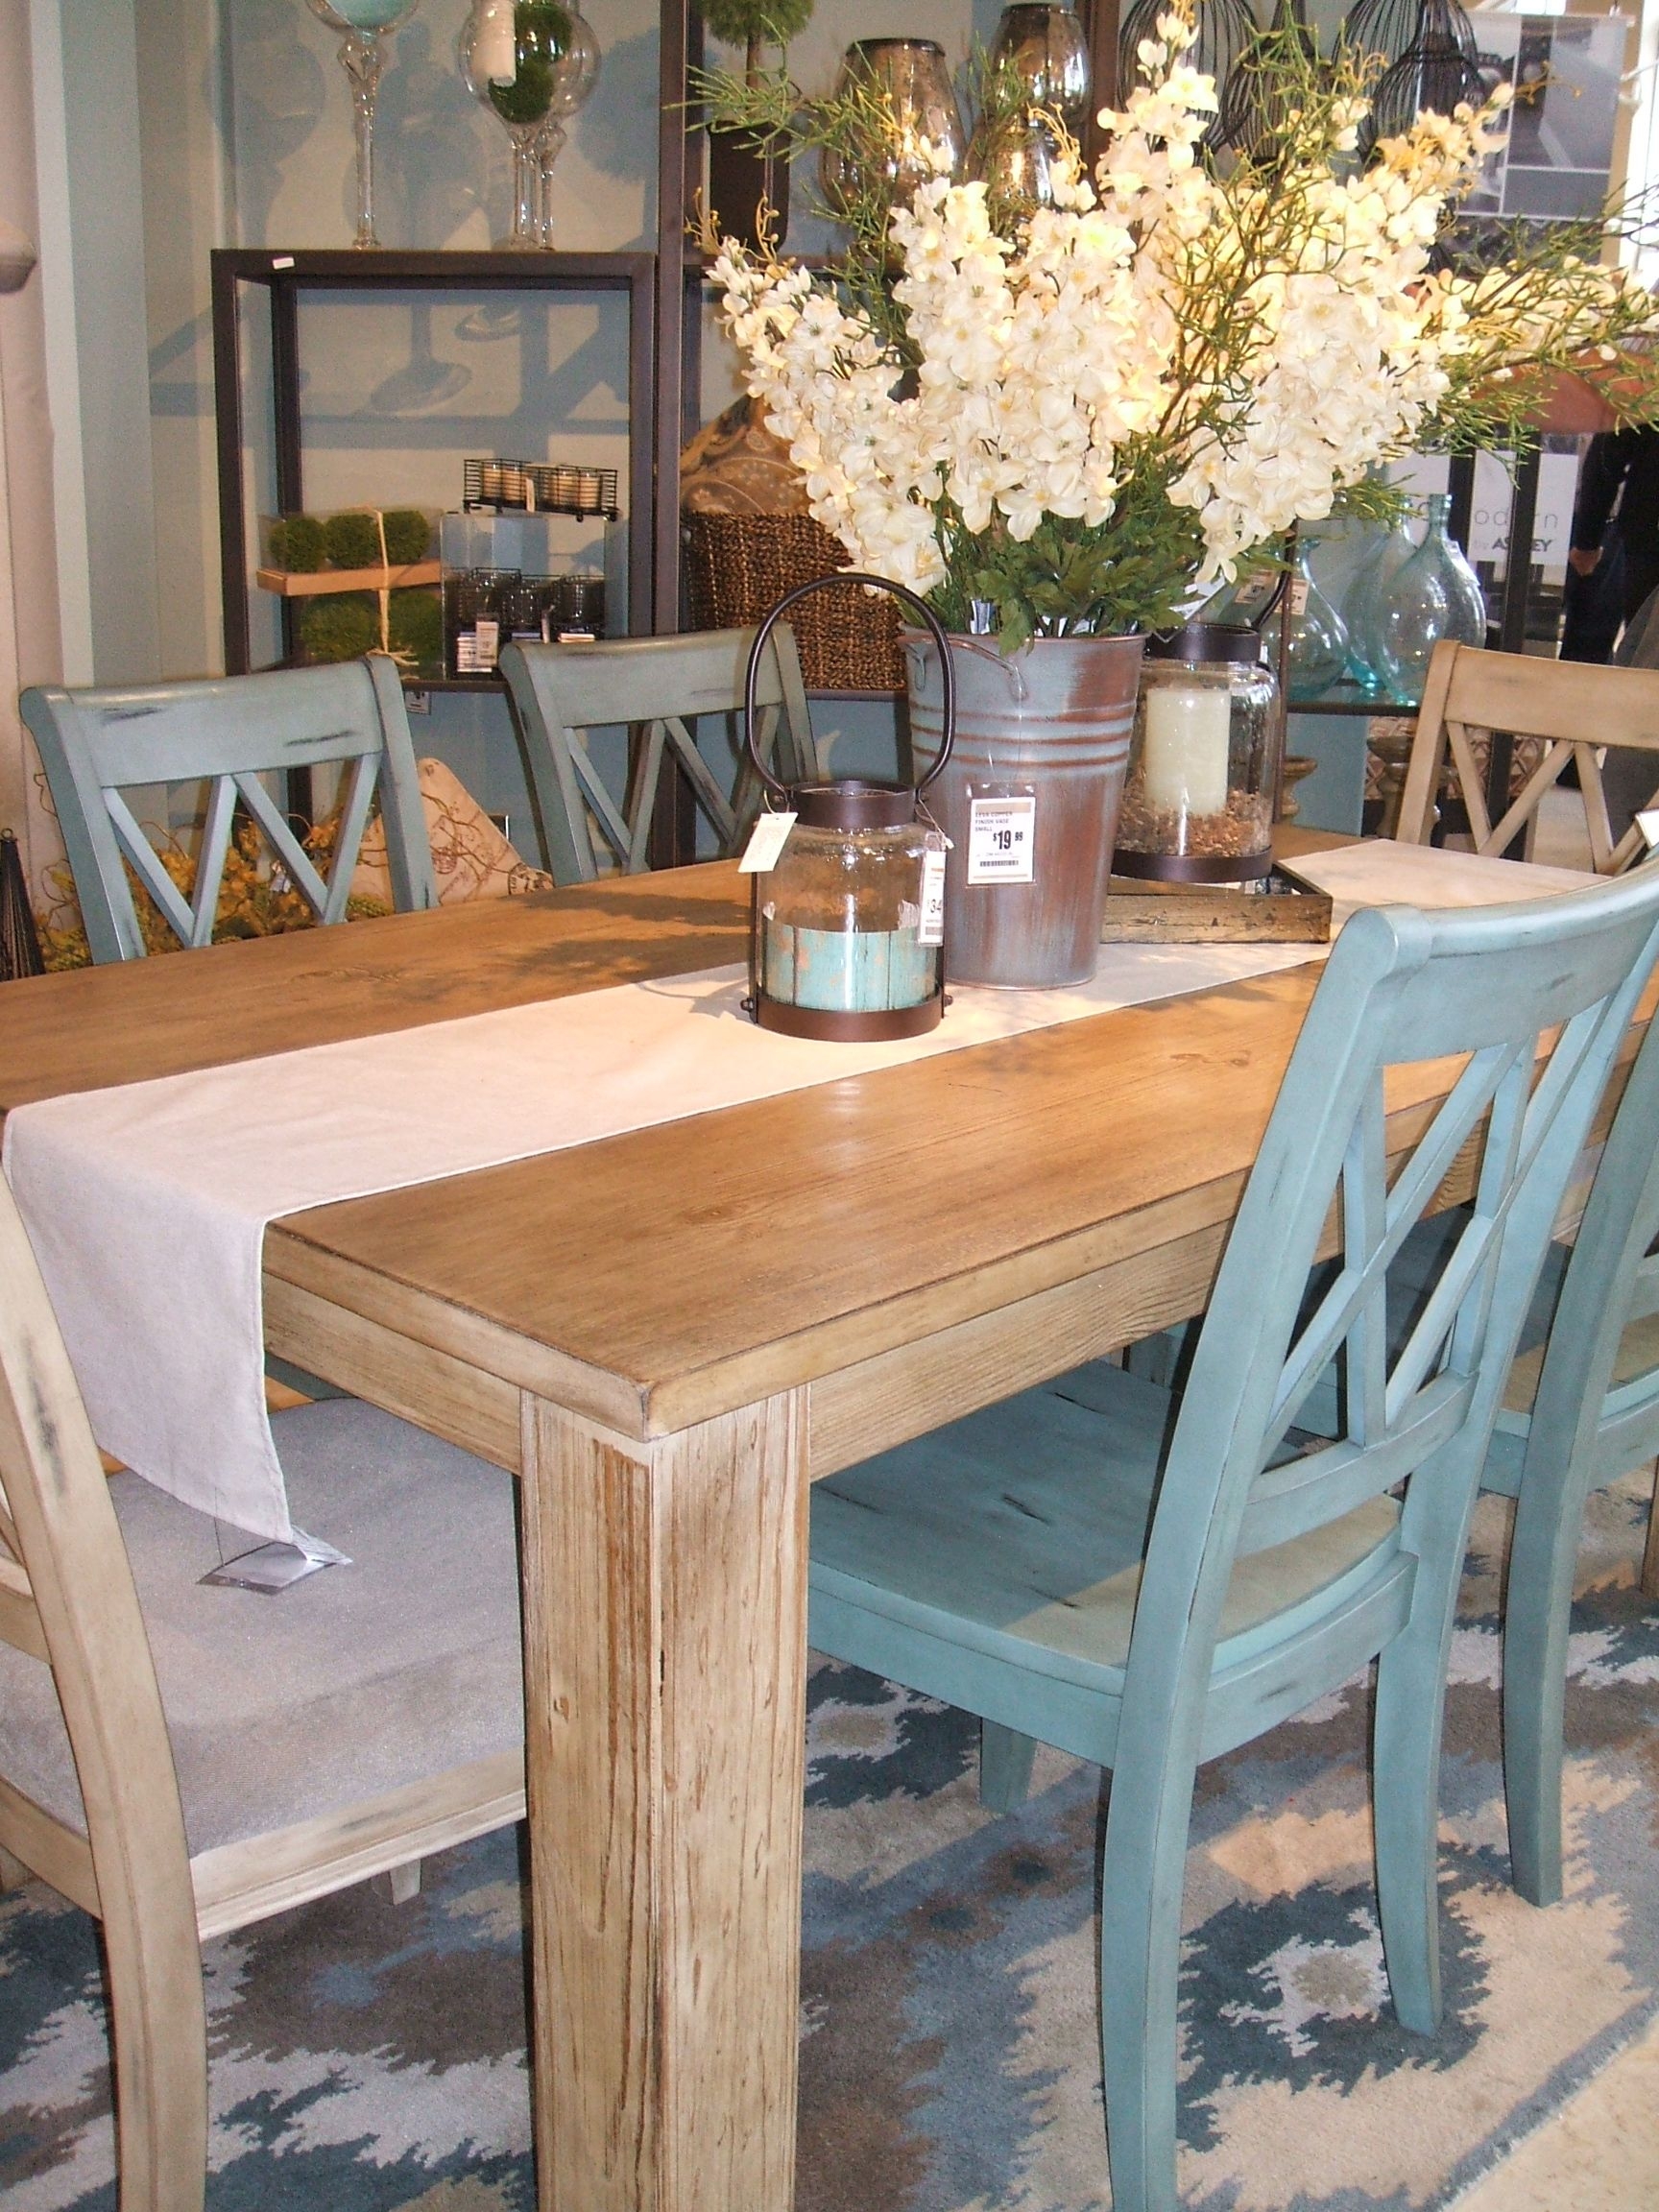 Farmhouse style table and chairs 2